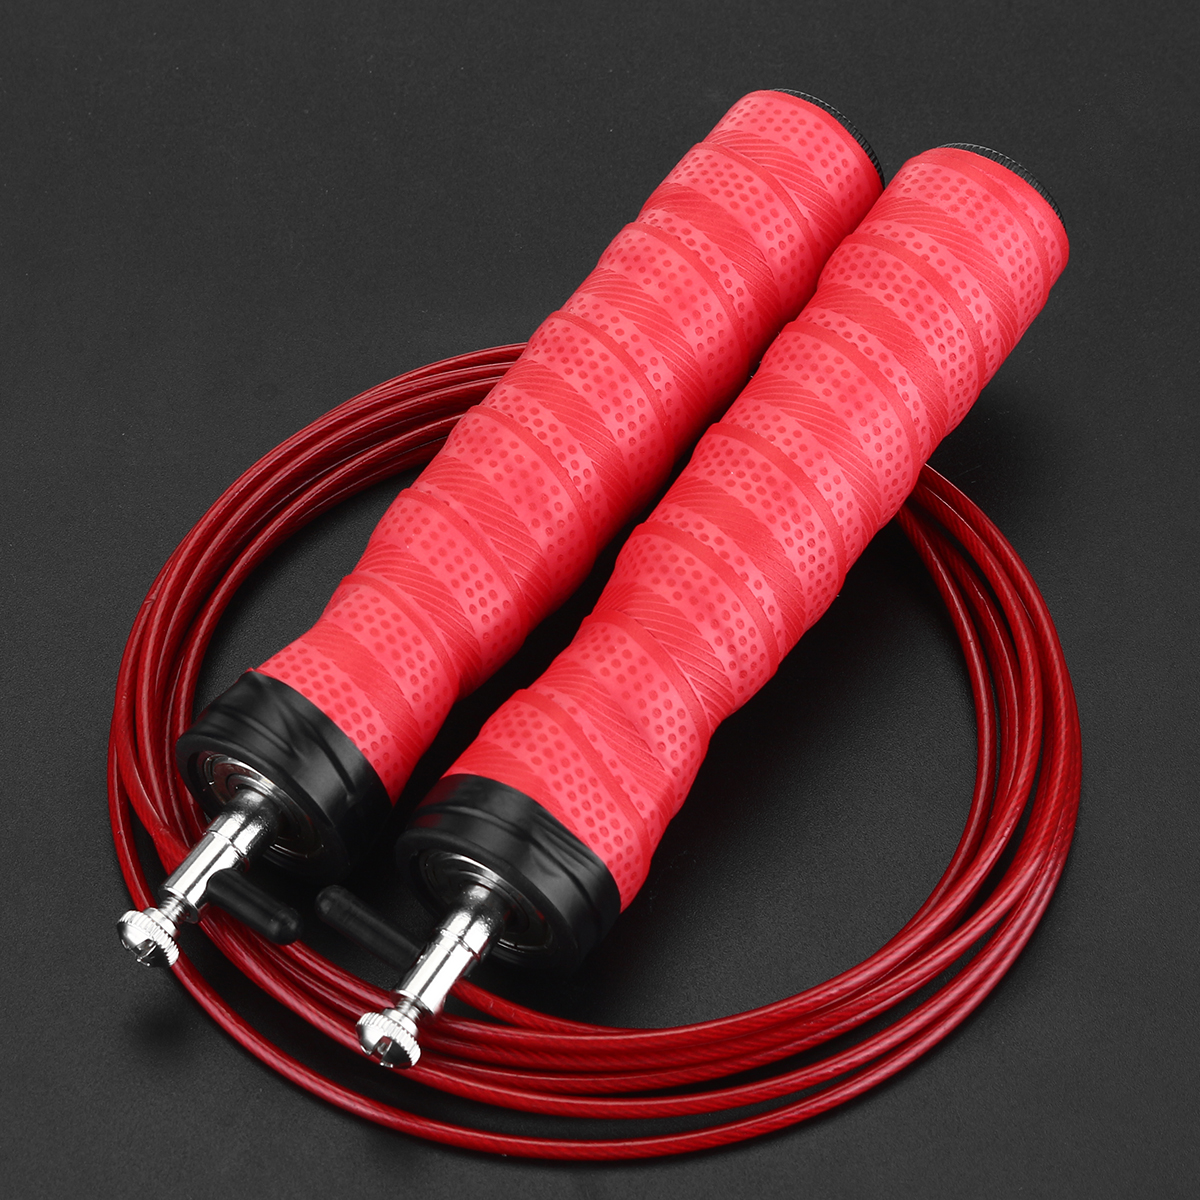 300cm-Length-Rope-Jumping-High-Speed-Aerobic-Steel-Wire-Jump-Rope-Fitness-Equipment-Skipping-1679175-7